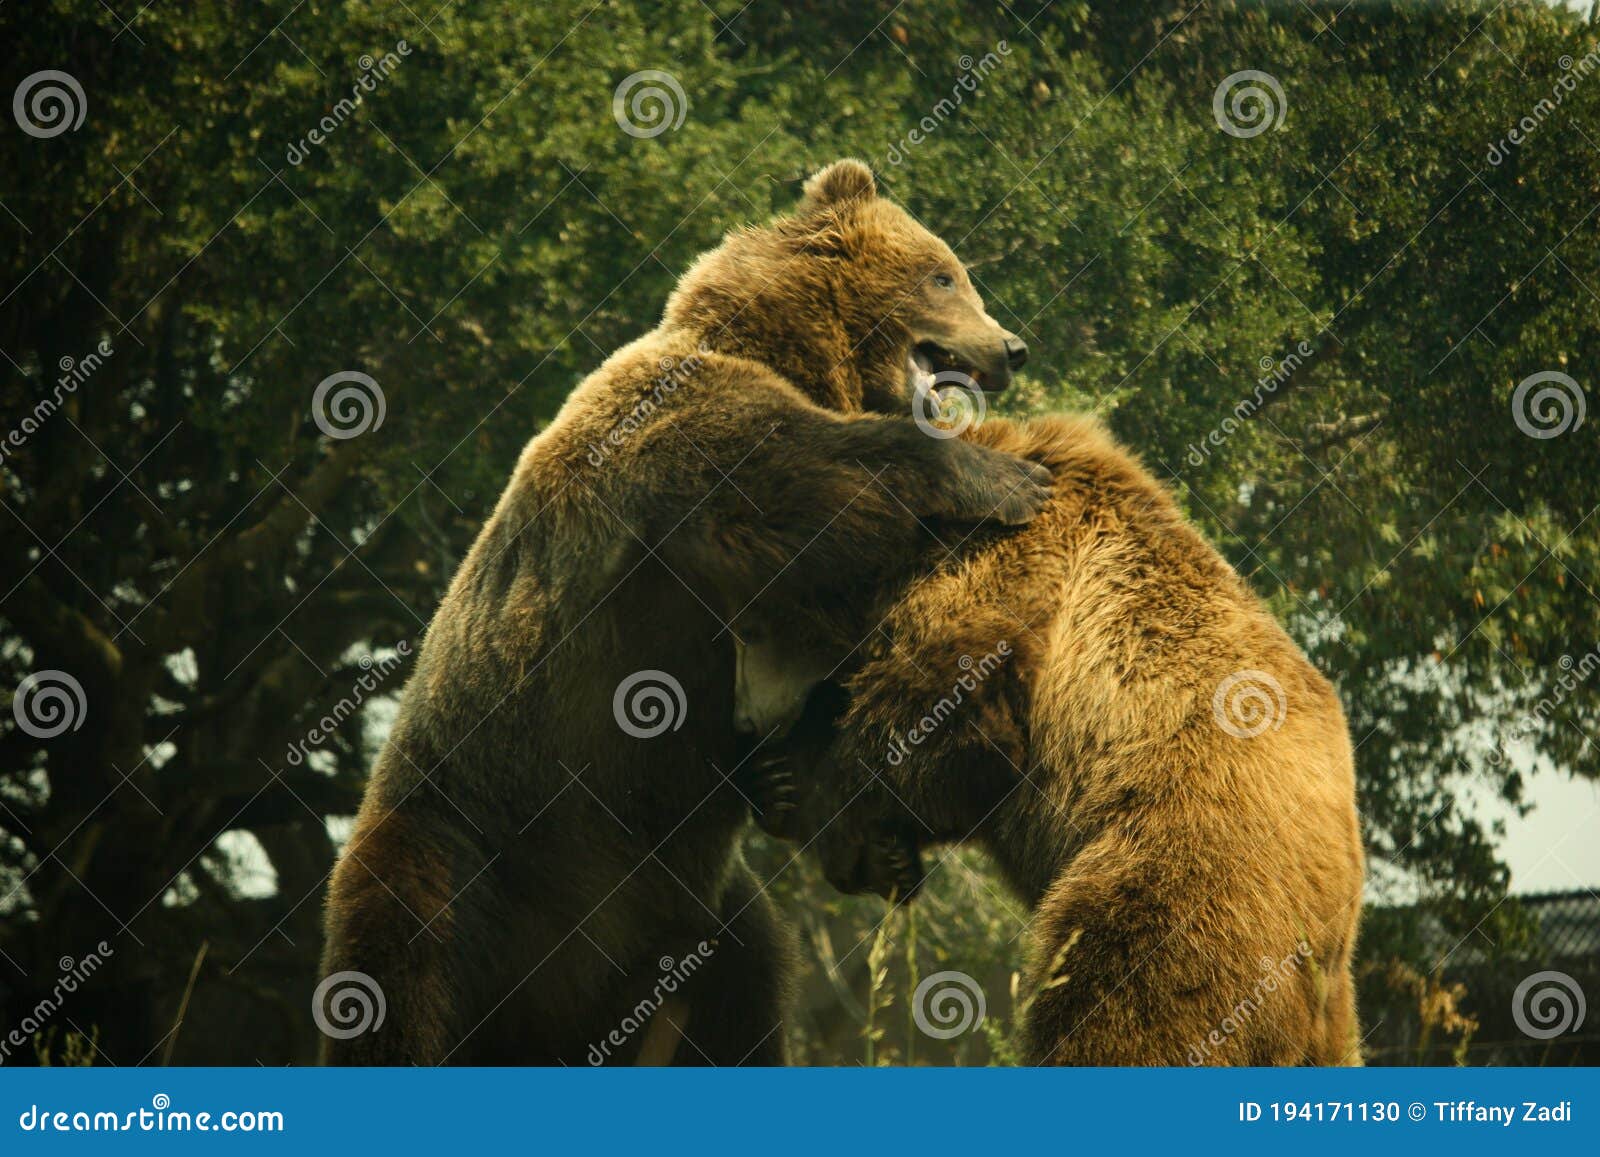 Two Grizzly Bears Standing Up Play Fighting Stock Photo - Image of cute,  play: 194171130